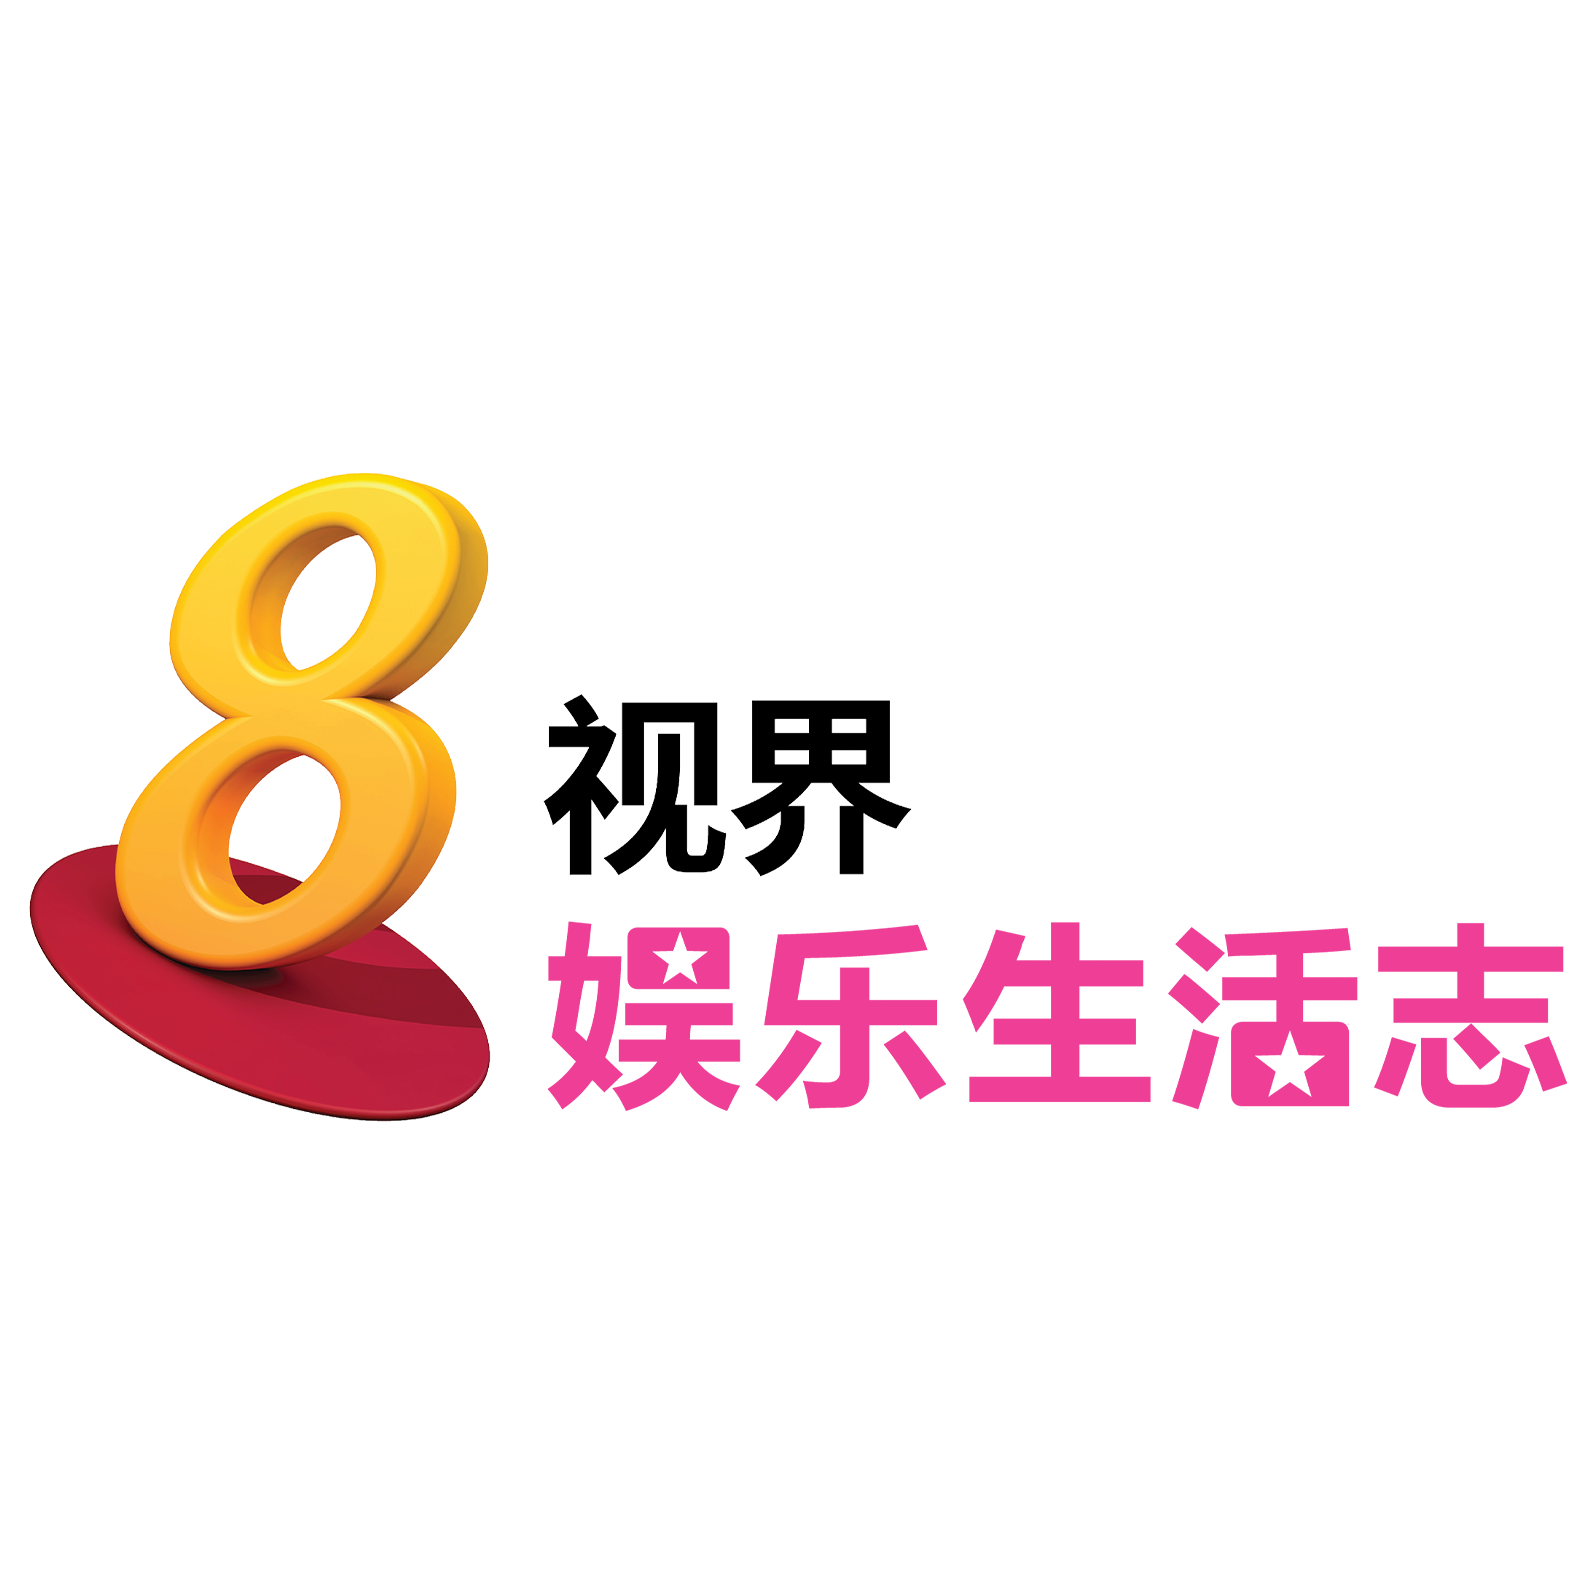 channel8-2-1